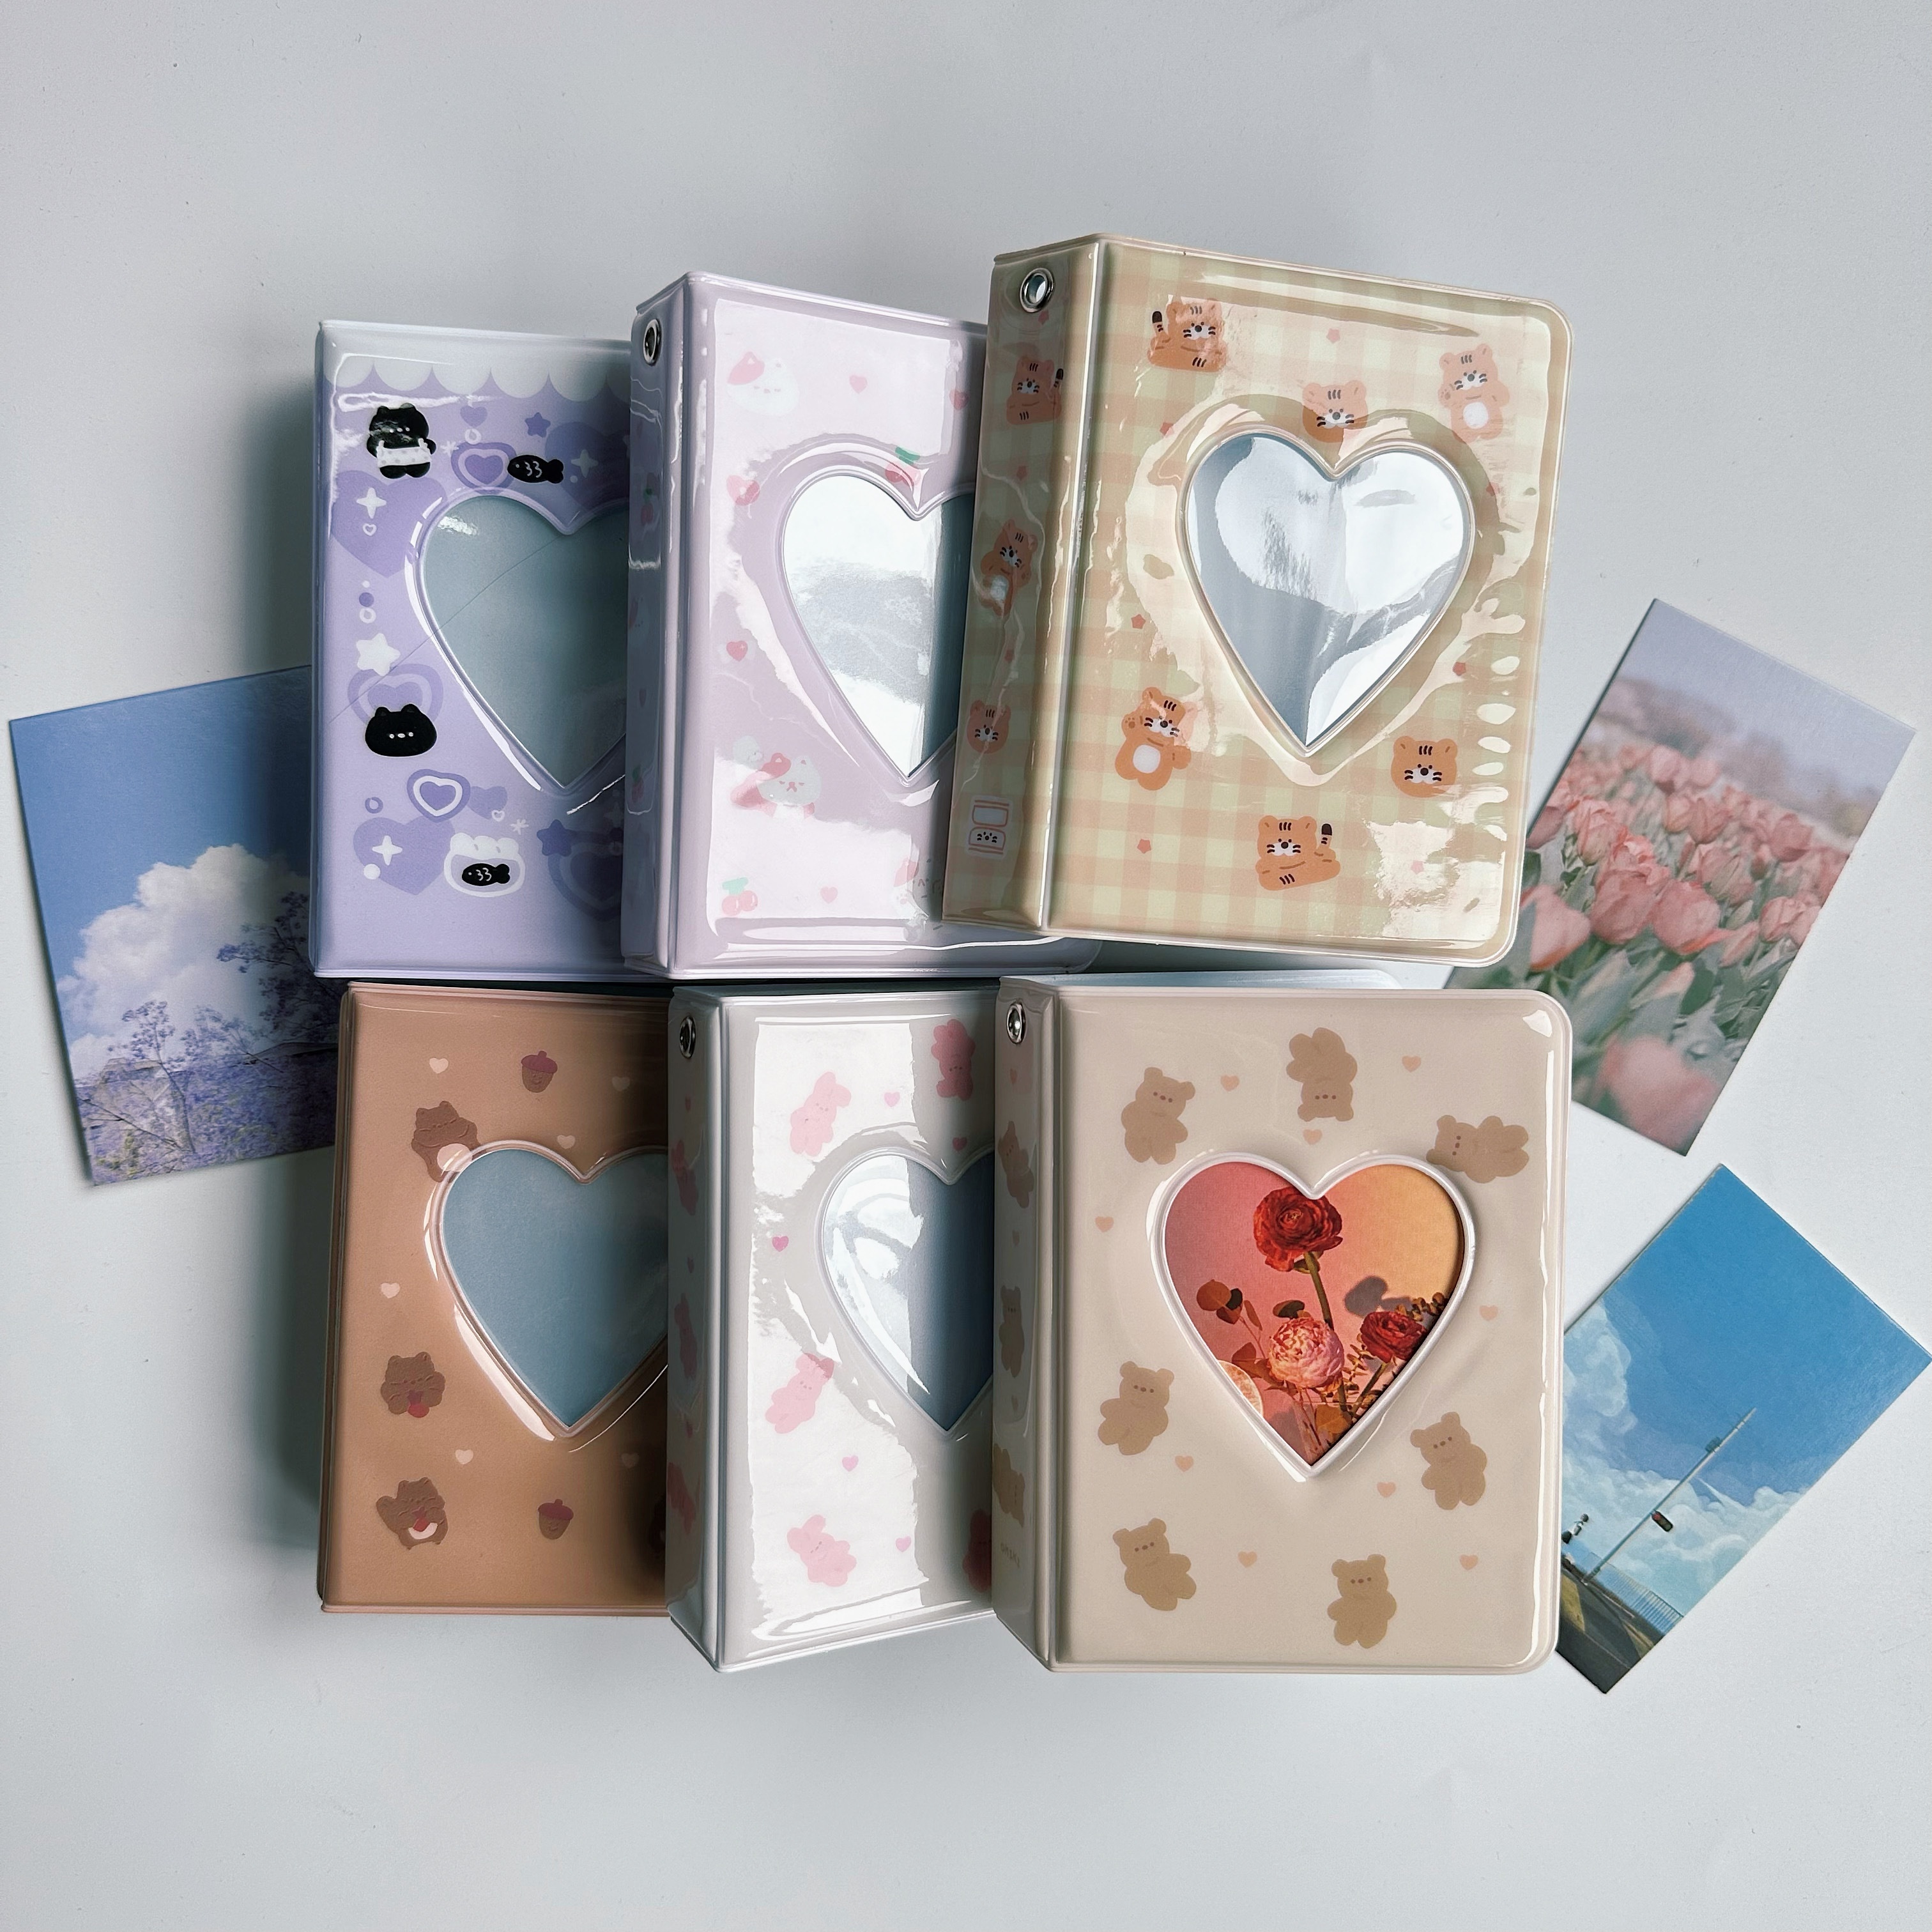 Instax Mini Photo Albums Pack of 3, Each Mini Album Holds Up to